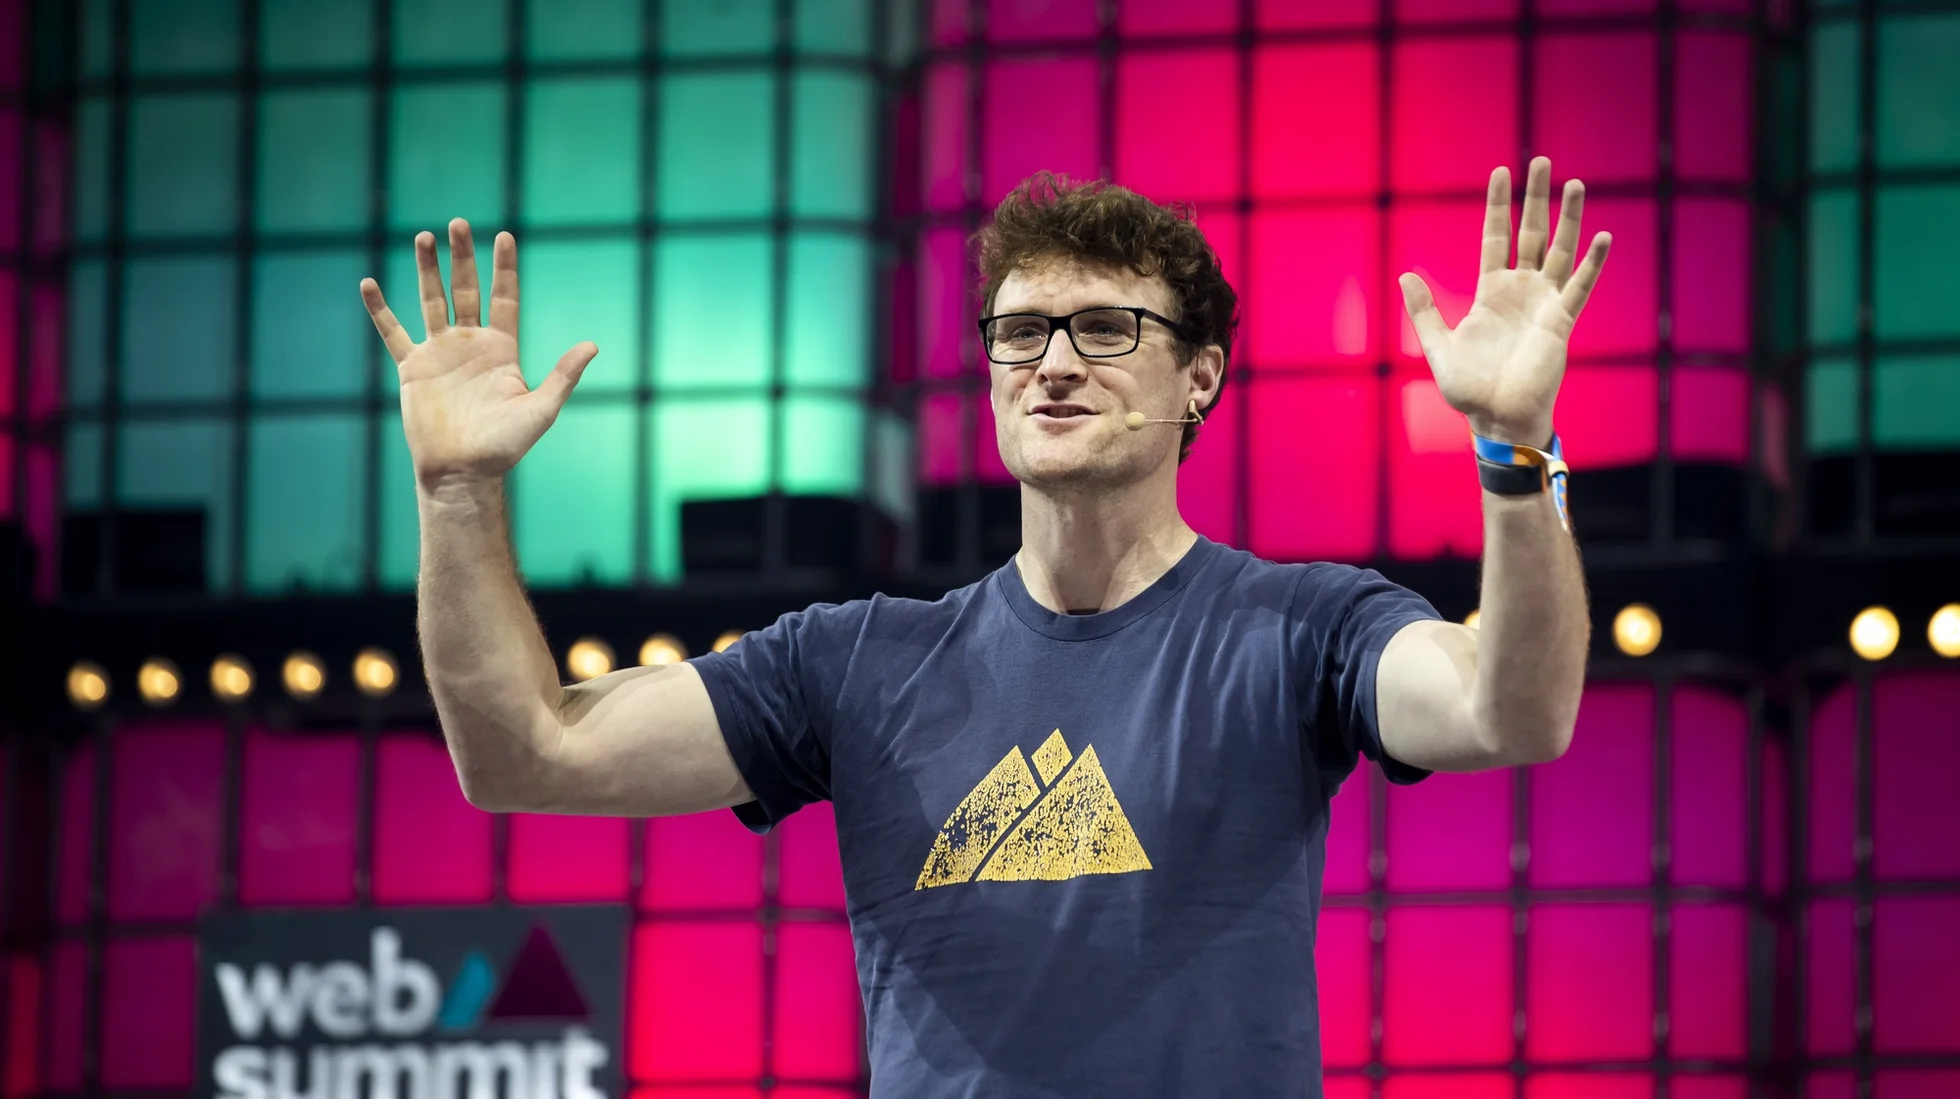 Former CEO of Web Summit resigned from his position following antisemitic comments